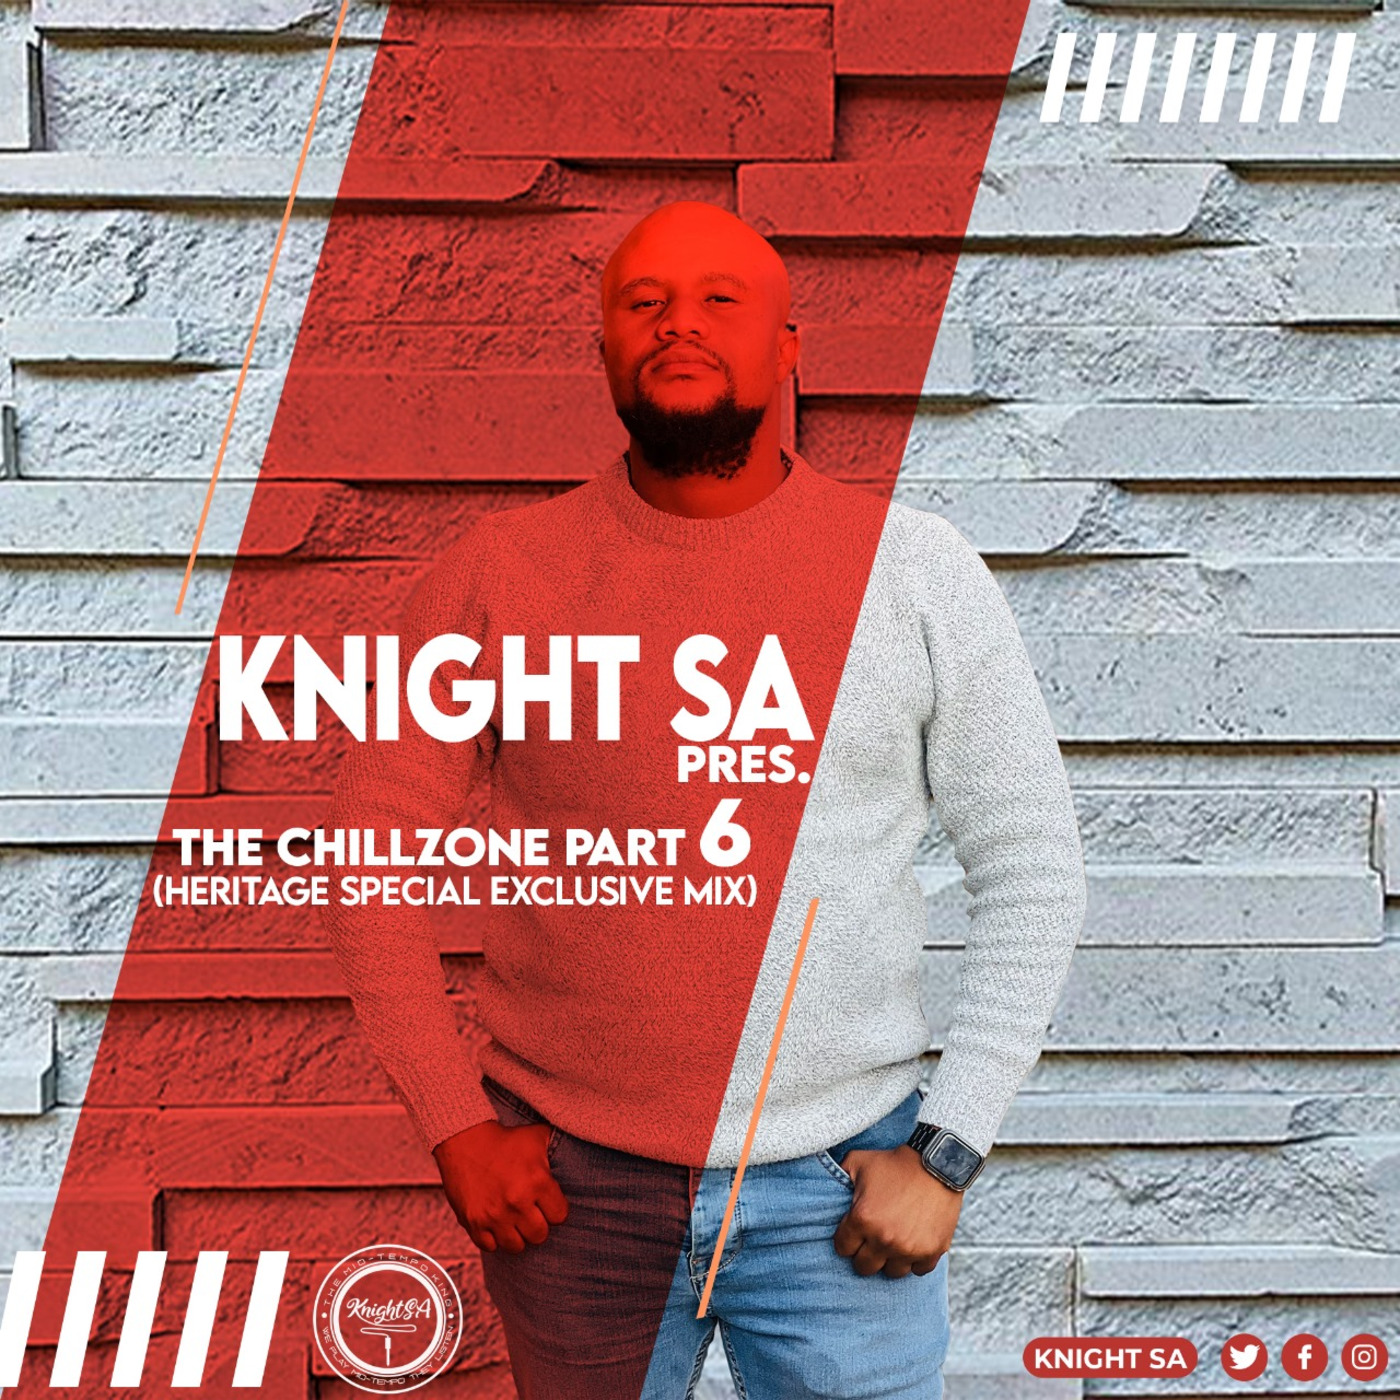 Knight SA - The ChillZone Part 6 (Heritage Special Exclusive Mix)